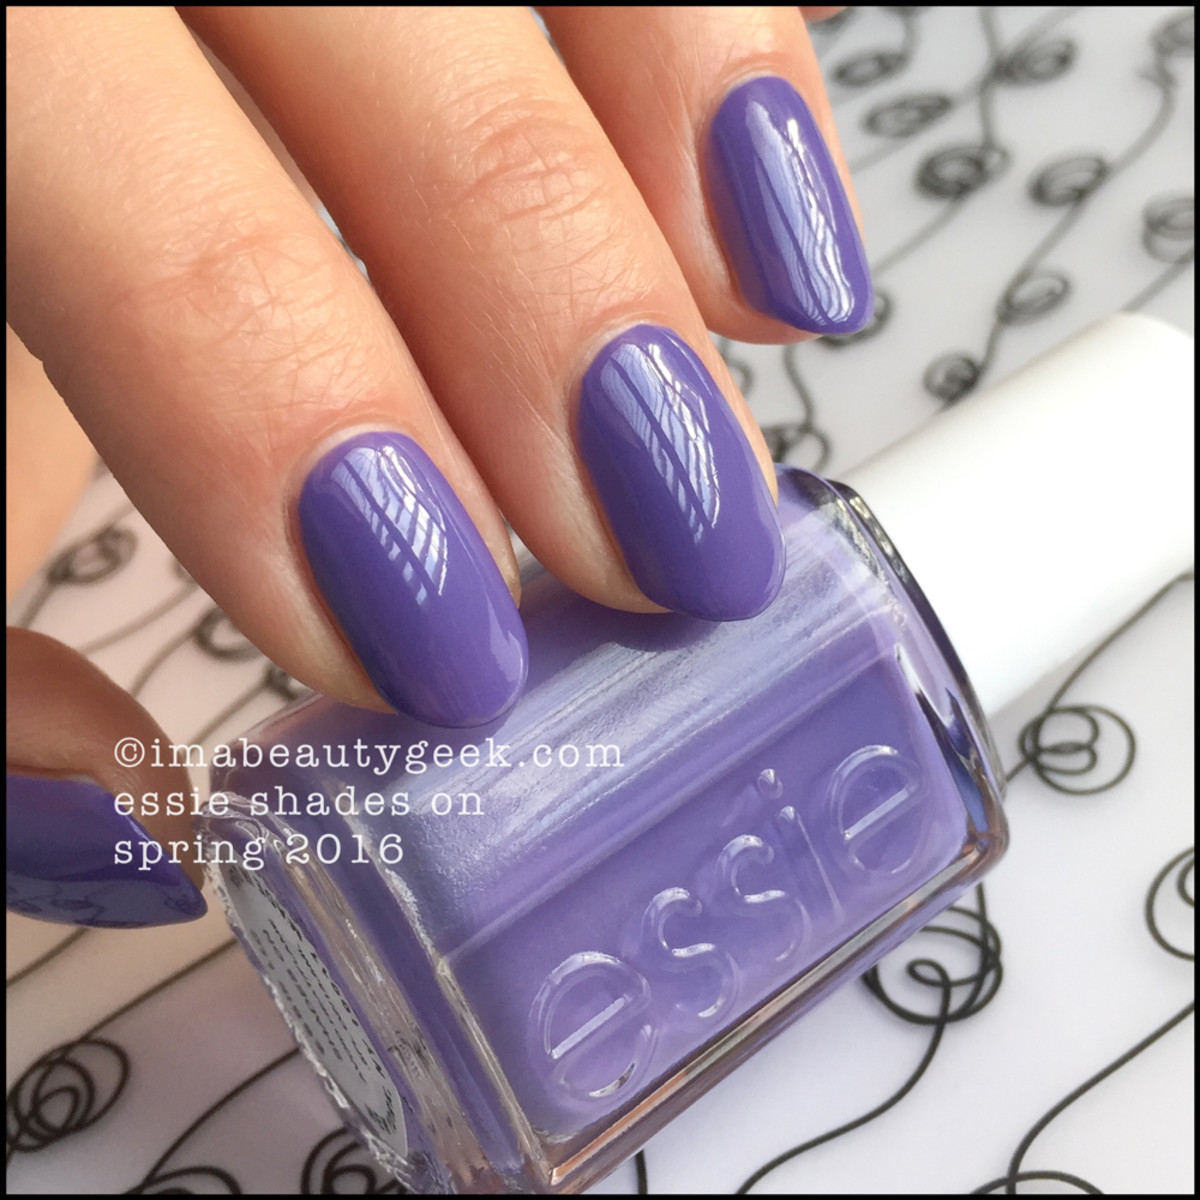 Essie Spring 2016 Collection Swatches Review_Essie Shades On